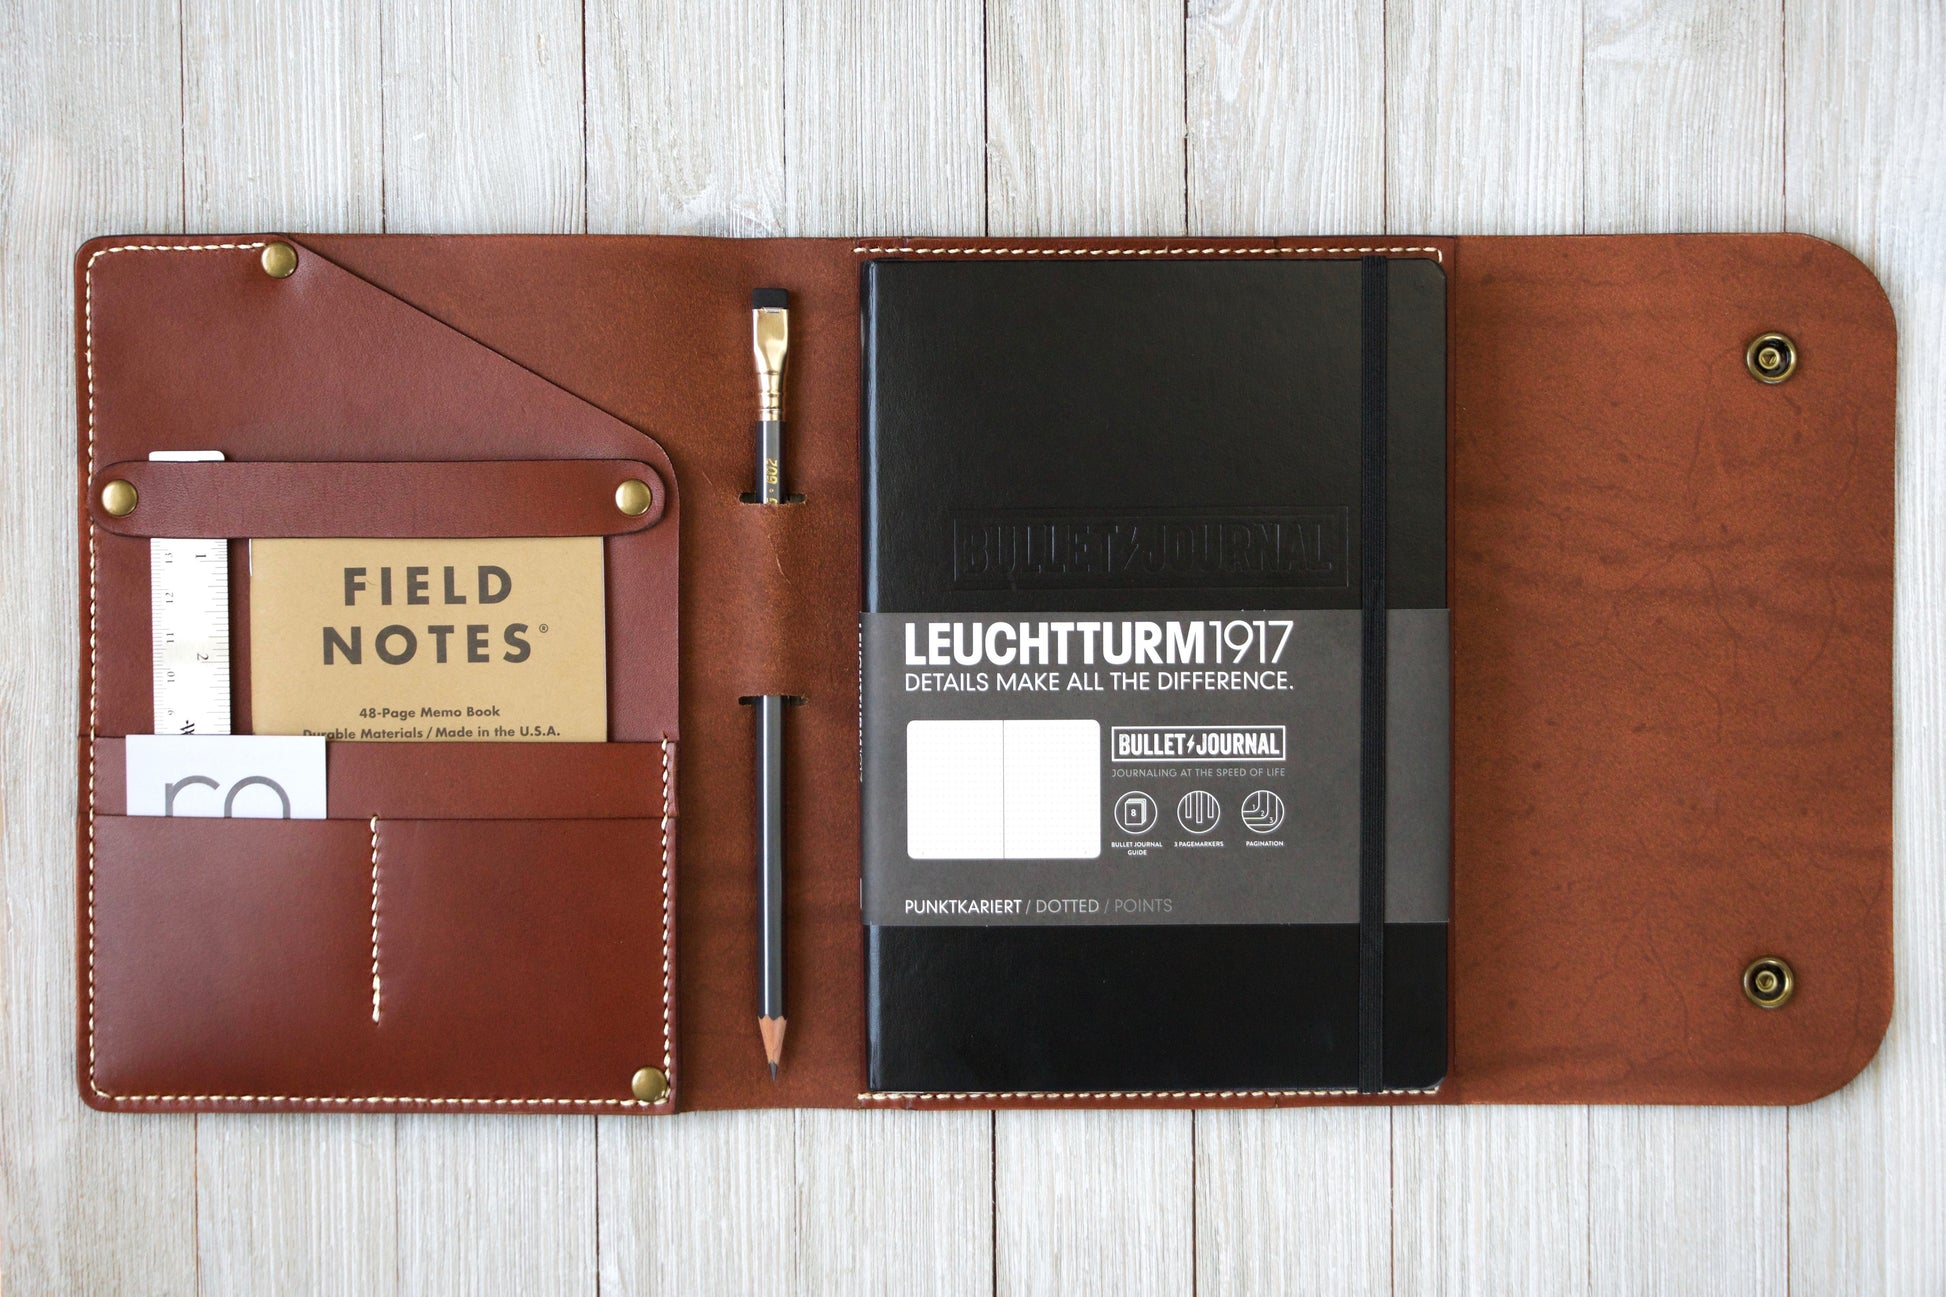 English Tan Bullet Journal Cover Inside w/Notebook - Rugged Minimalist